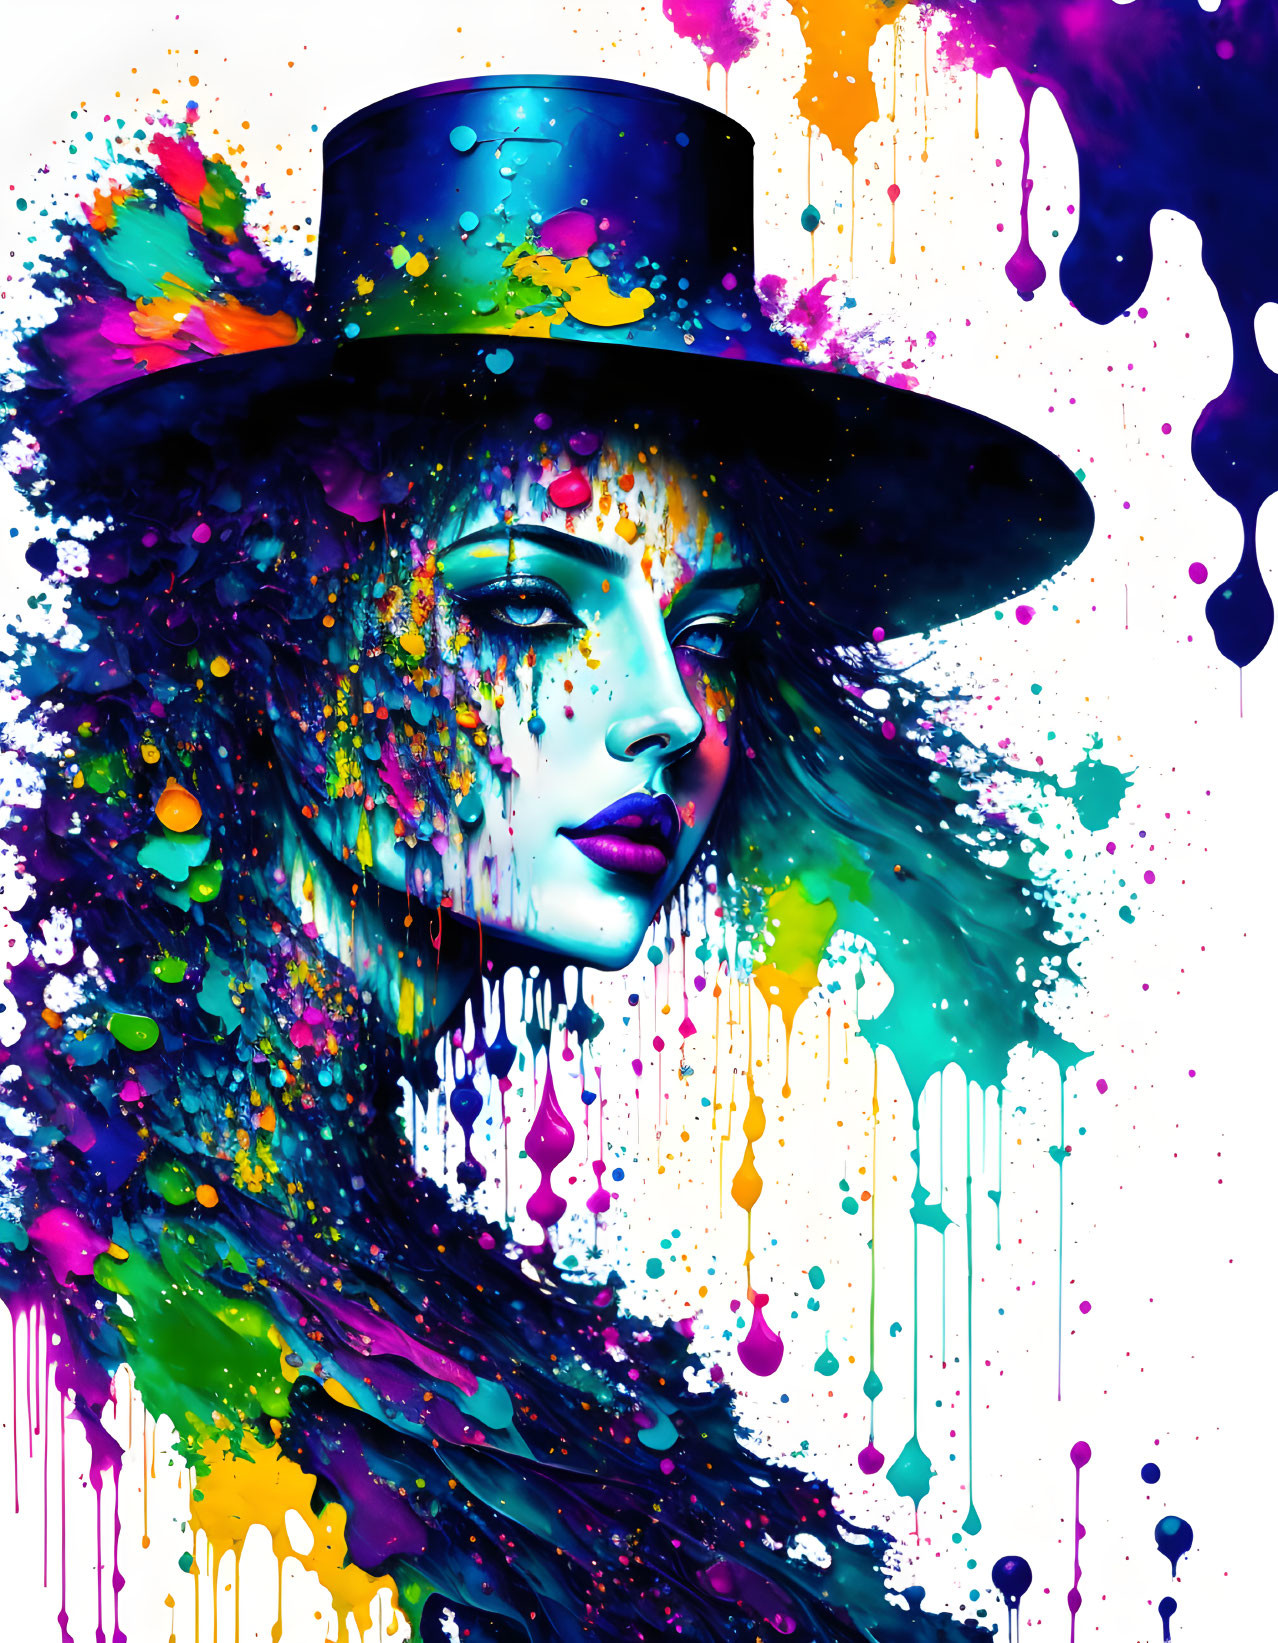 Painted hatter